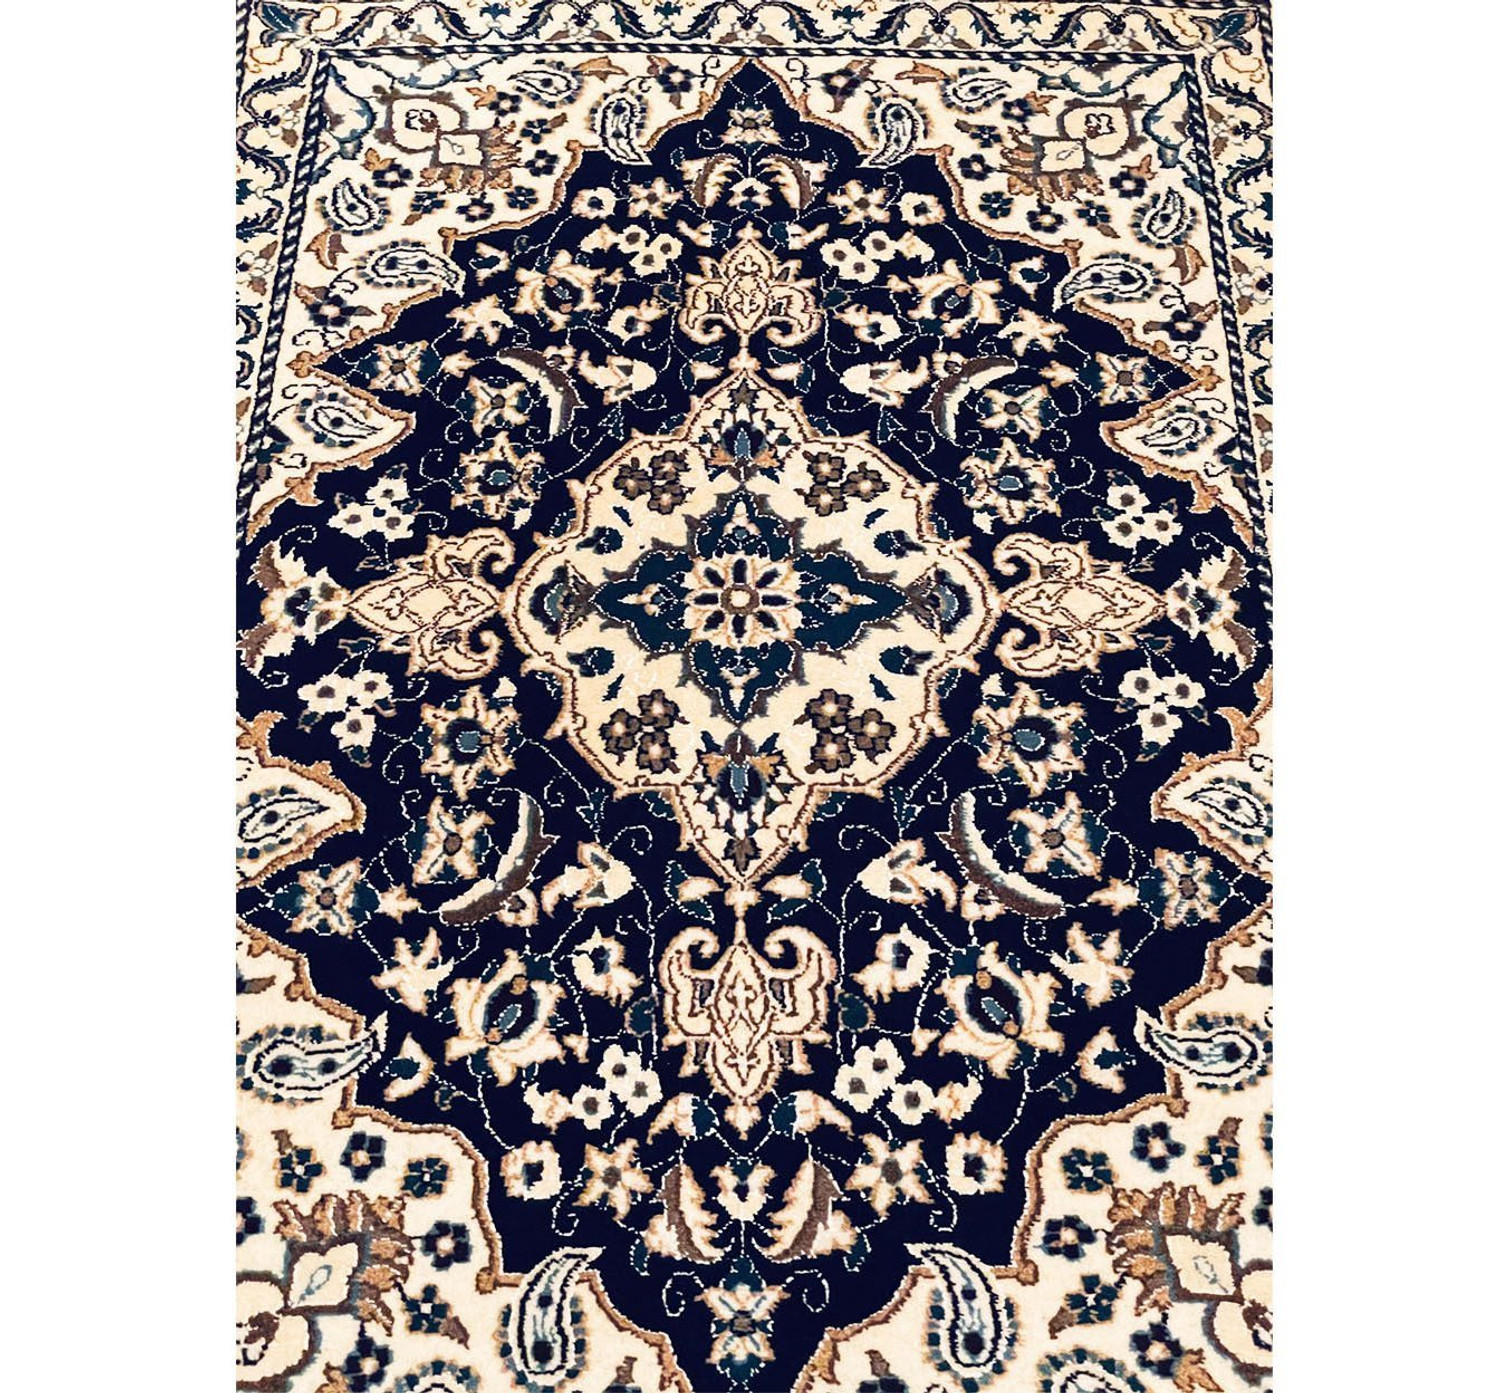 Beautiful rug with intricate midfield pattern